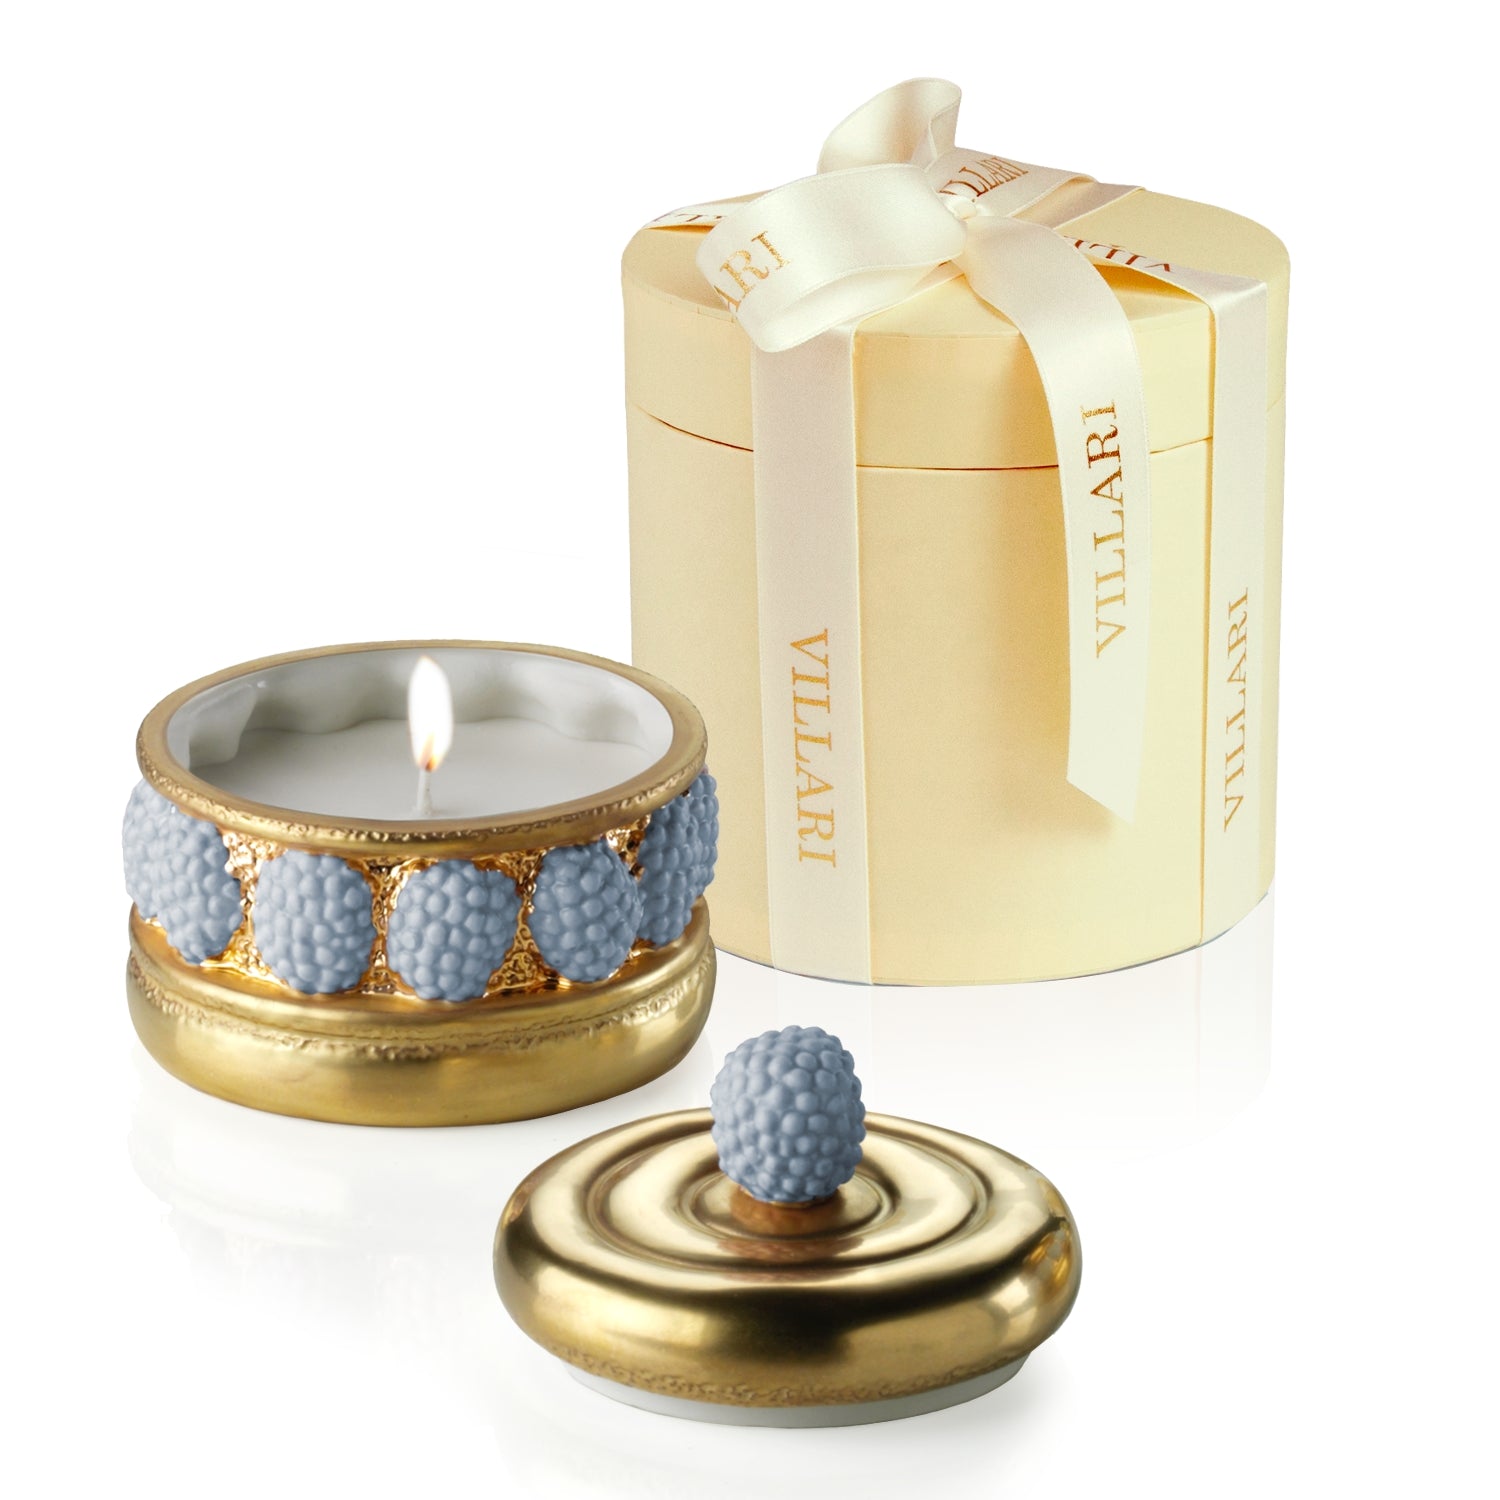 Chantilly Ispahan Cake Scented Candle - Gold & Blue